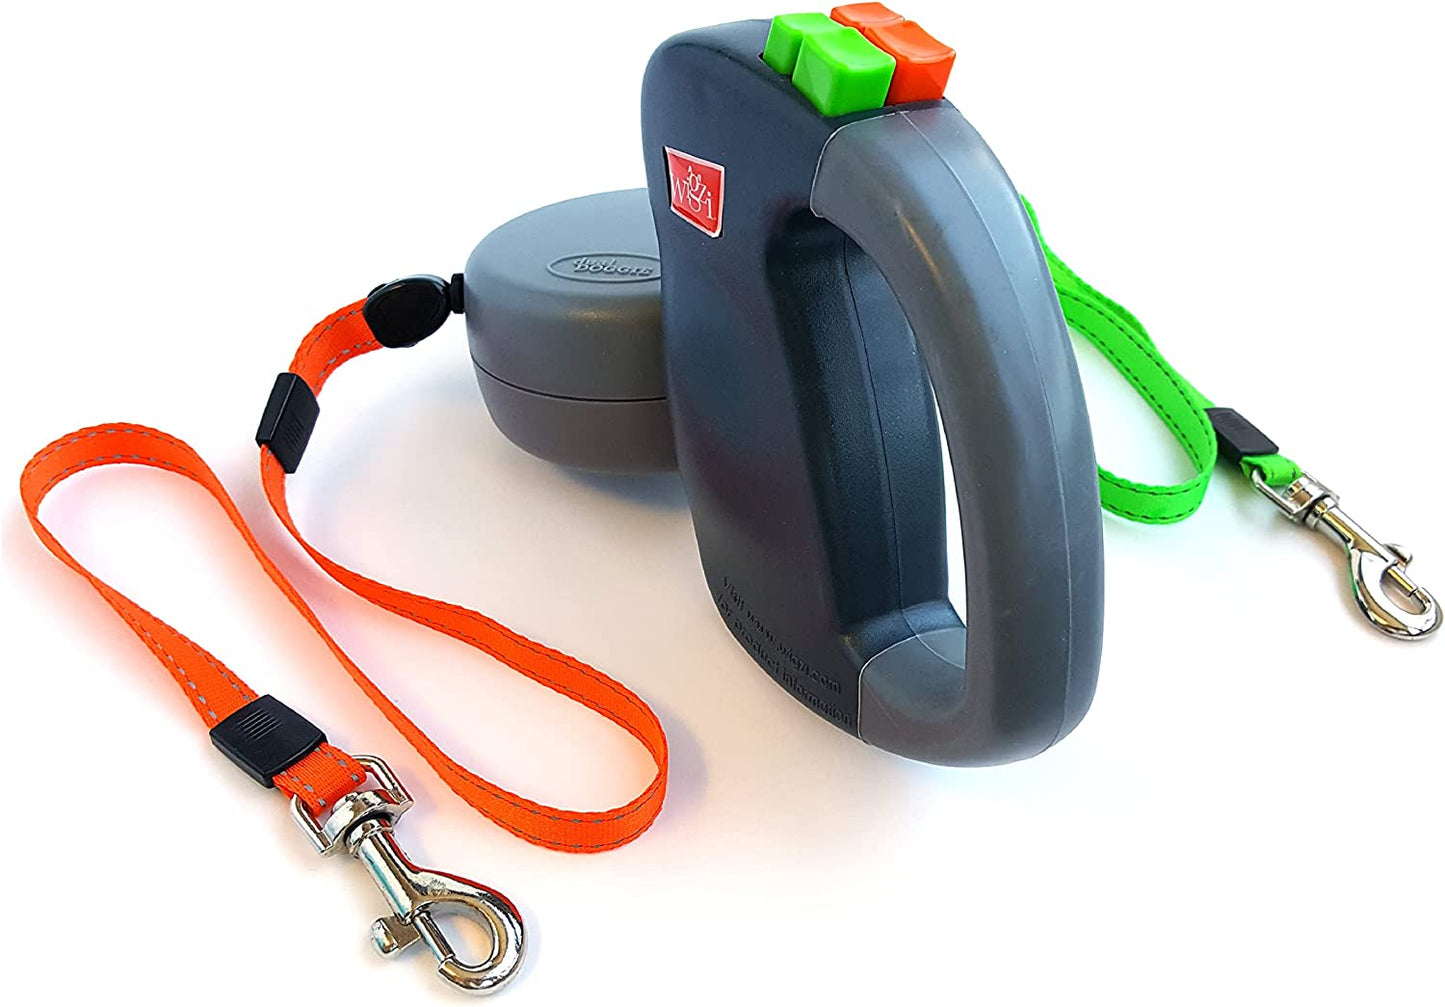 (2 Two Dog Reflective Retractable Pet Leash – 360 Degree Zero Tangle Patent - Two Dogs Each up to 50 Lbs and 10Ft. Reflective Orange and Green Leads. Dual Locking, Small, Gray